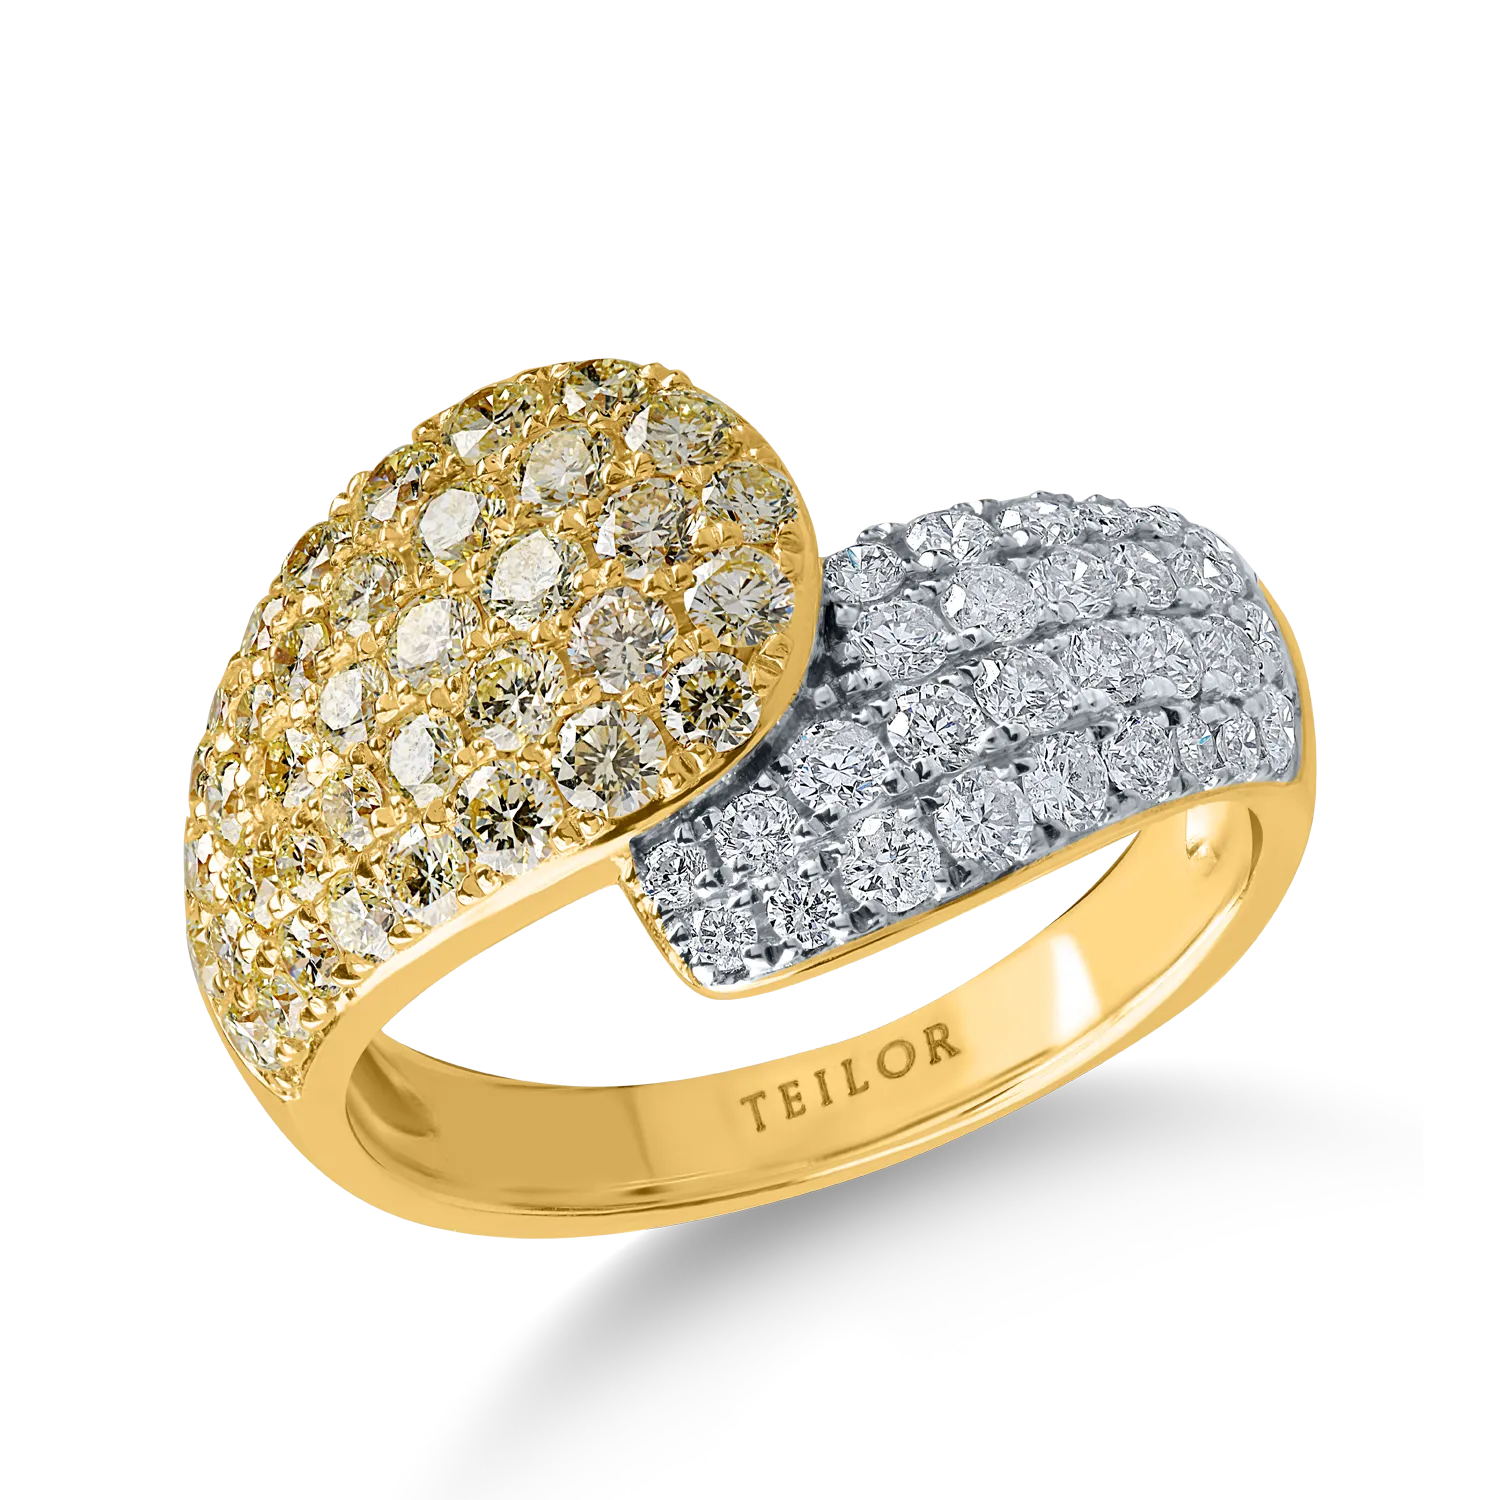 White-yellow gold ring with 1ct yellow diamonds and 0.5ct clear diamonds